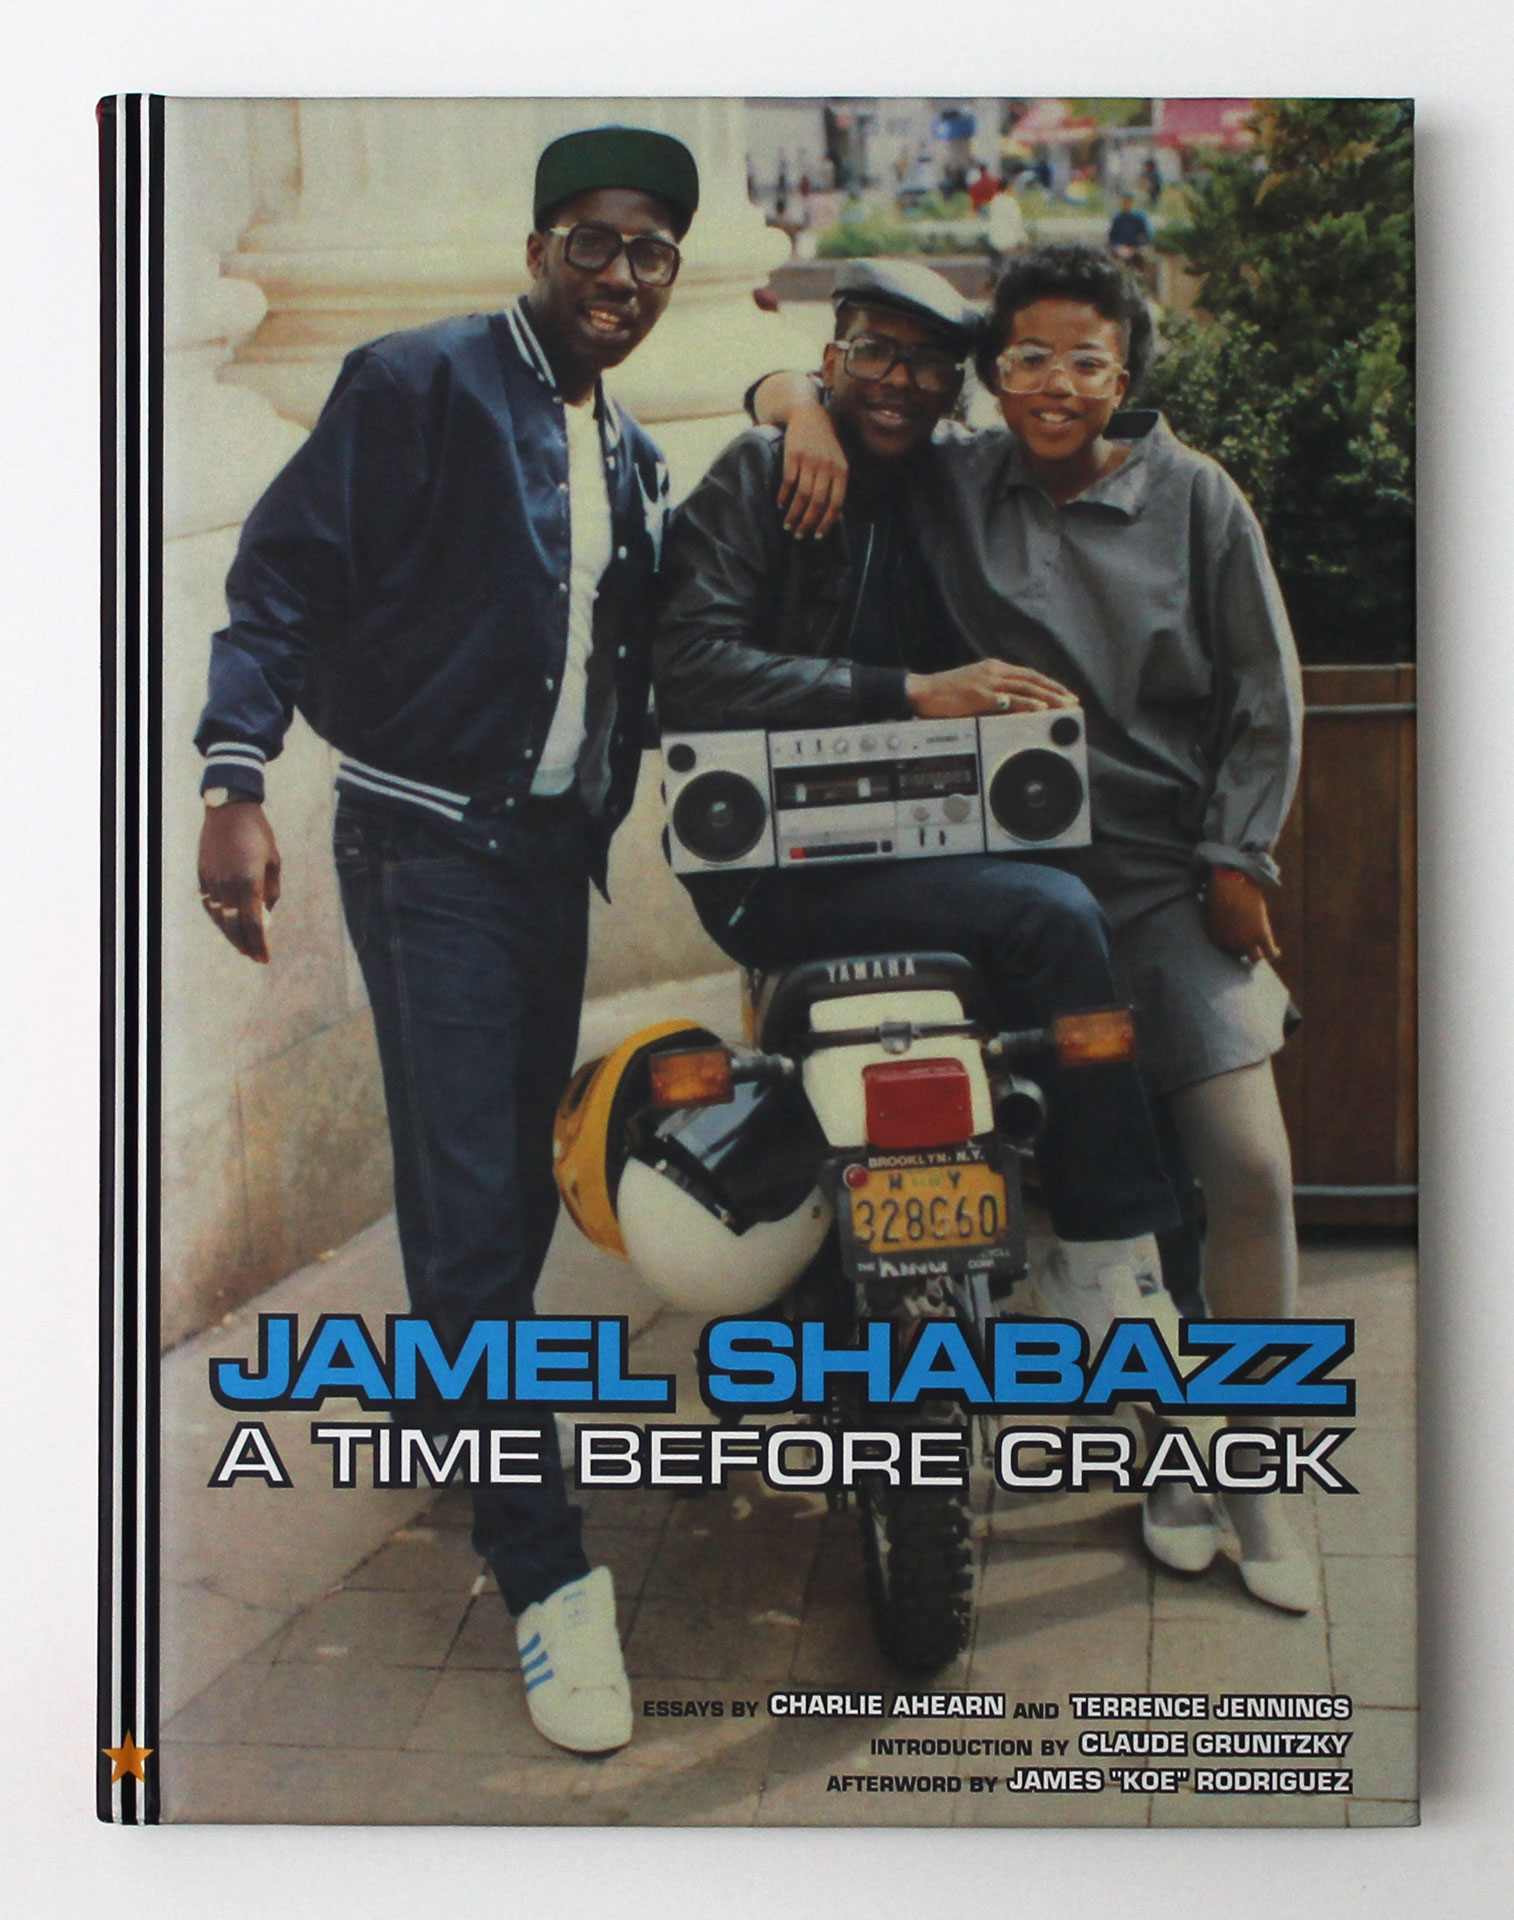 A Time Before Crack by Jamel Shabazz